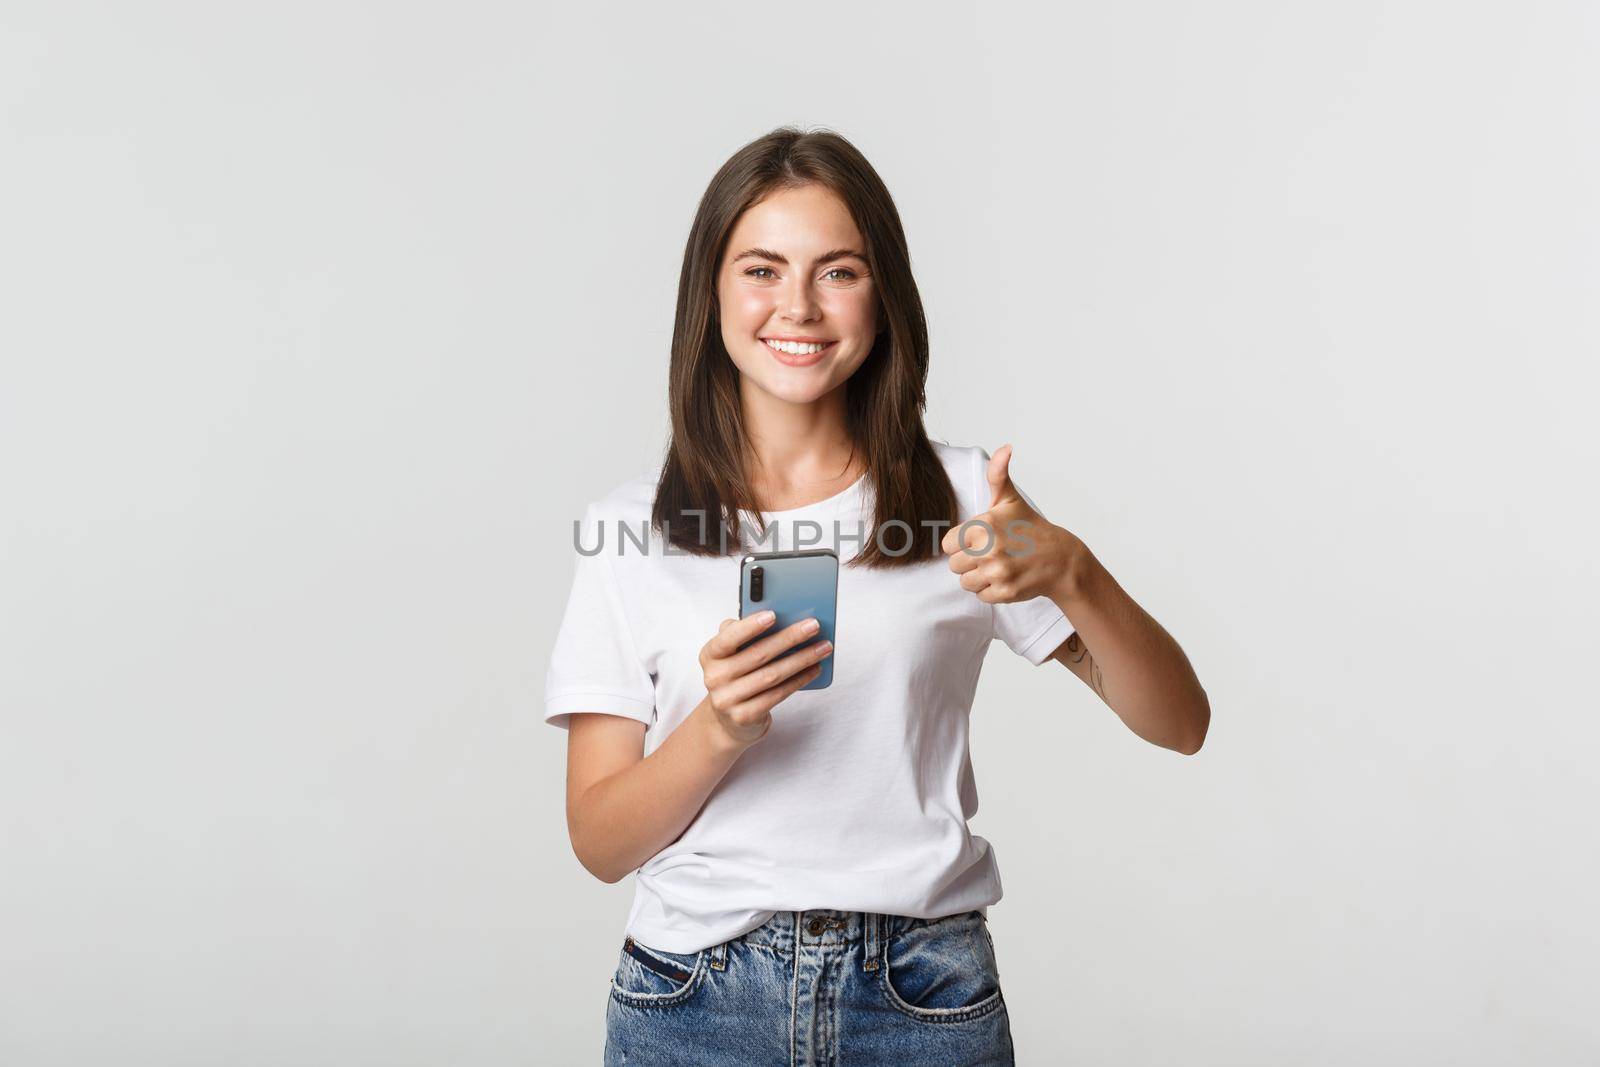 Satisfied smiling young woman showing thumbs-up while using smartphone.